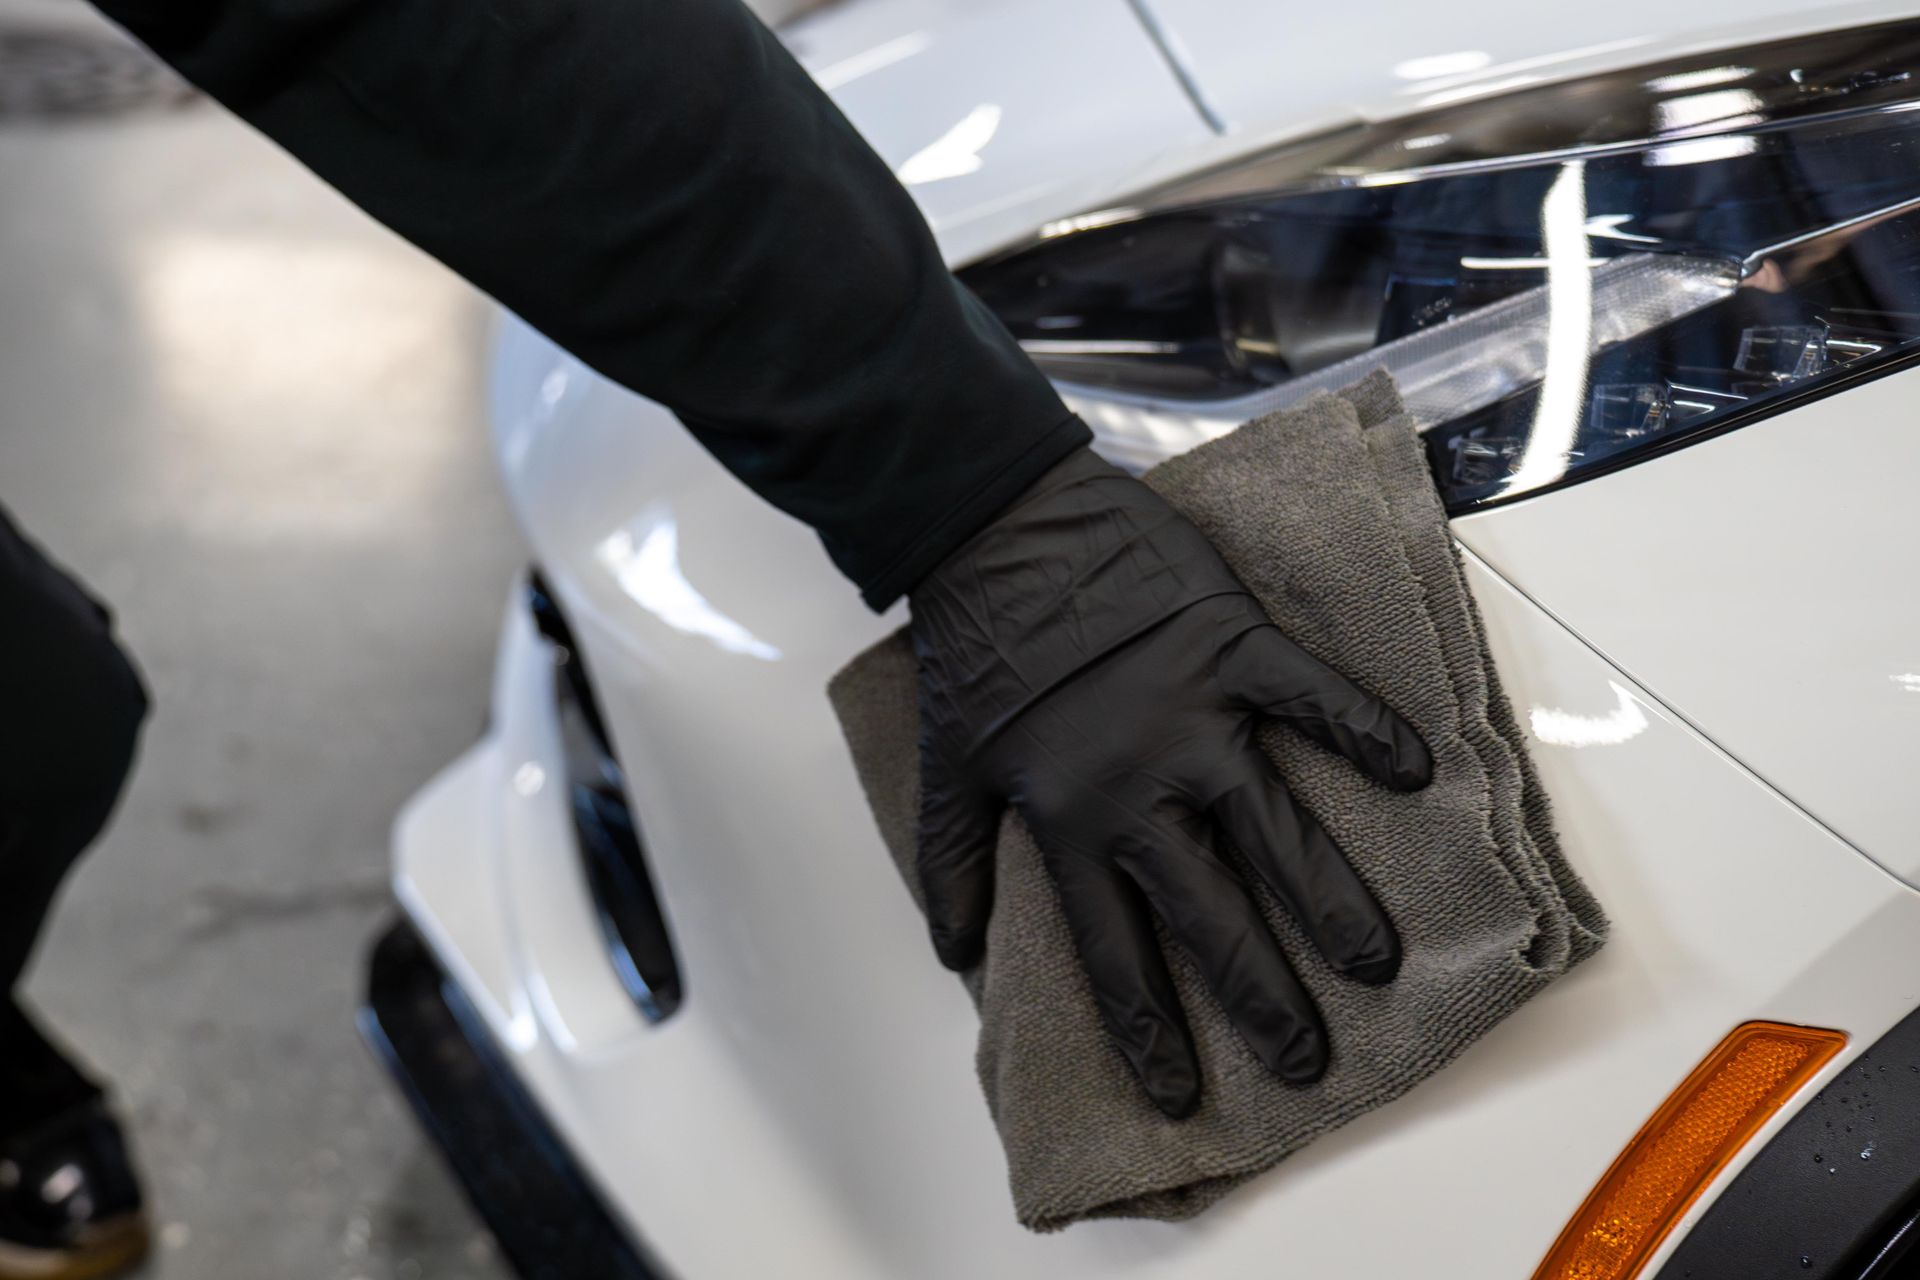 A person wearing black gloves is cleaning a white car with a towel .